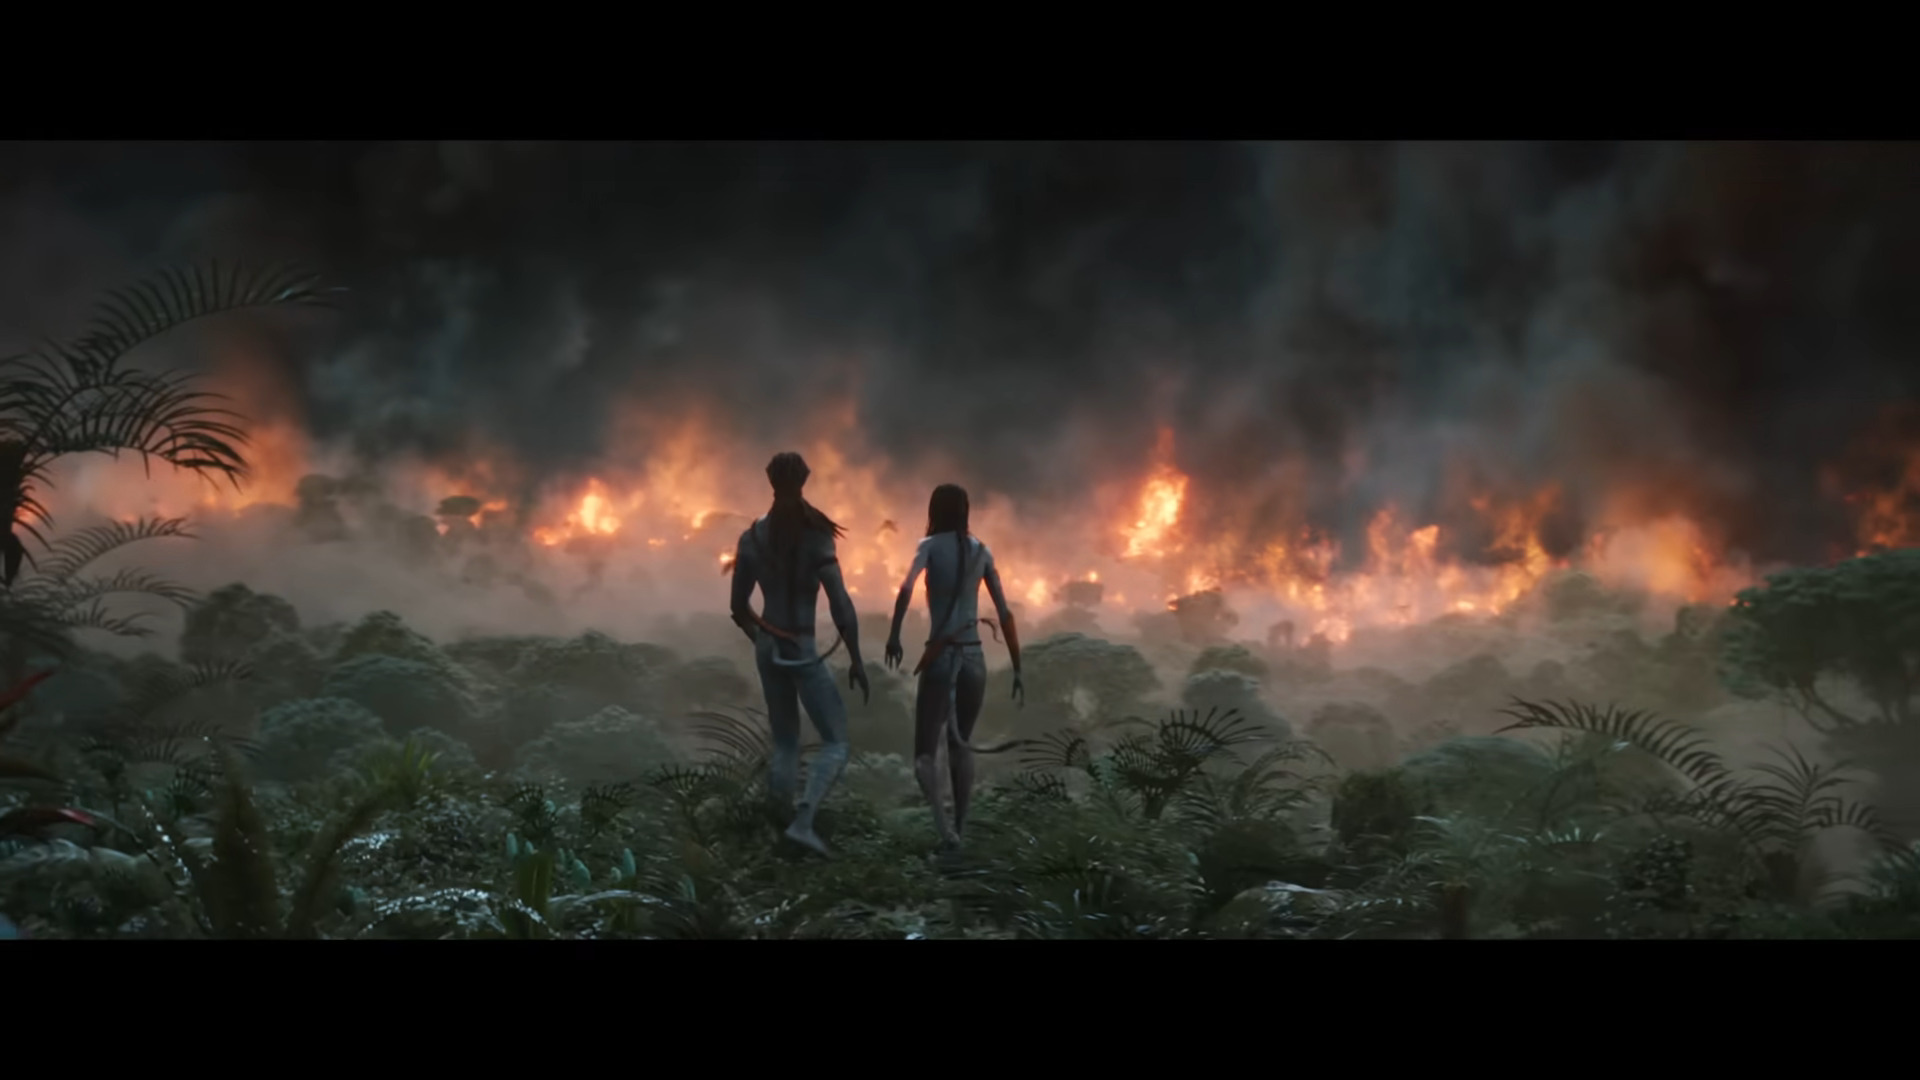 Jake Sully (Sam Worthington) and Neytiri (Zoe Saldaña) look on at the aftermath of an RDA attack in Avatar: The Way of Water (2022), Disney via YouTube